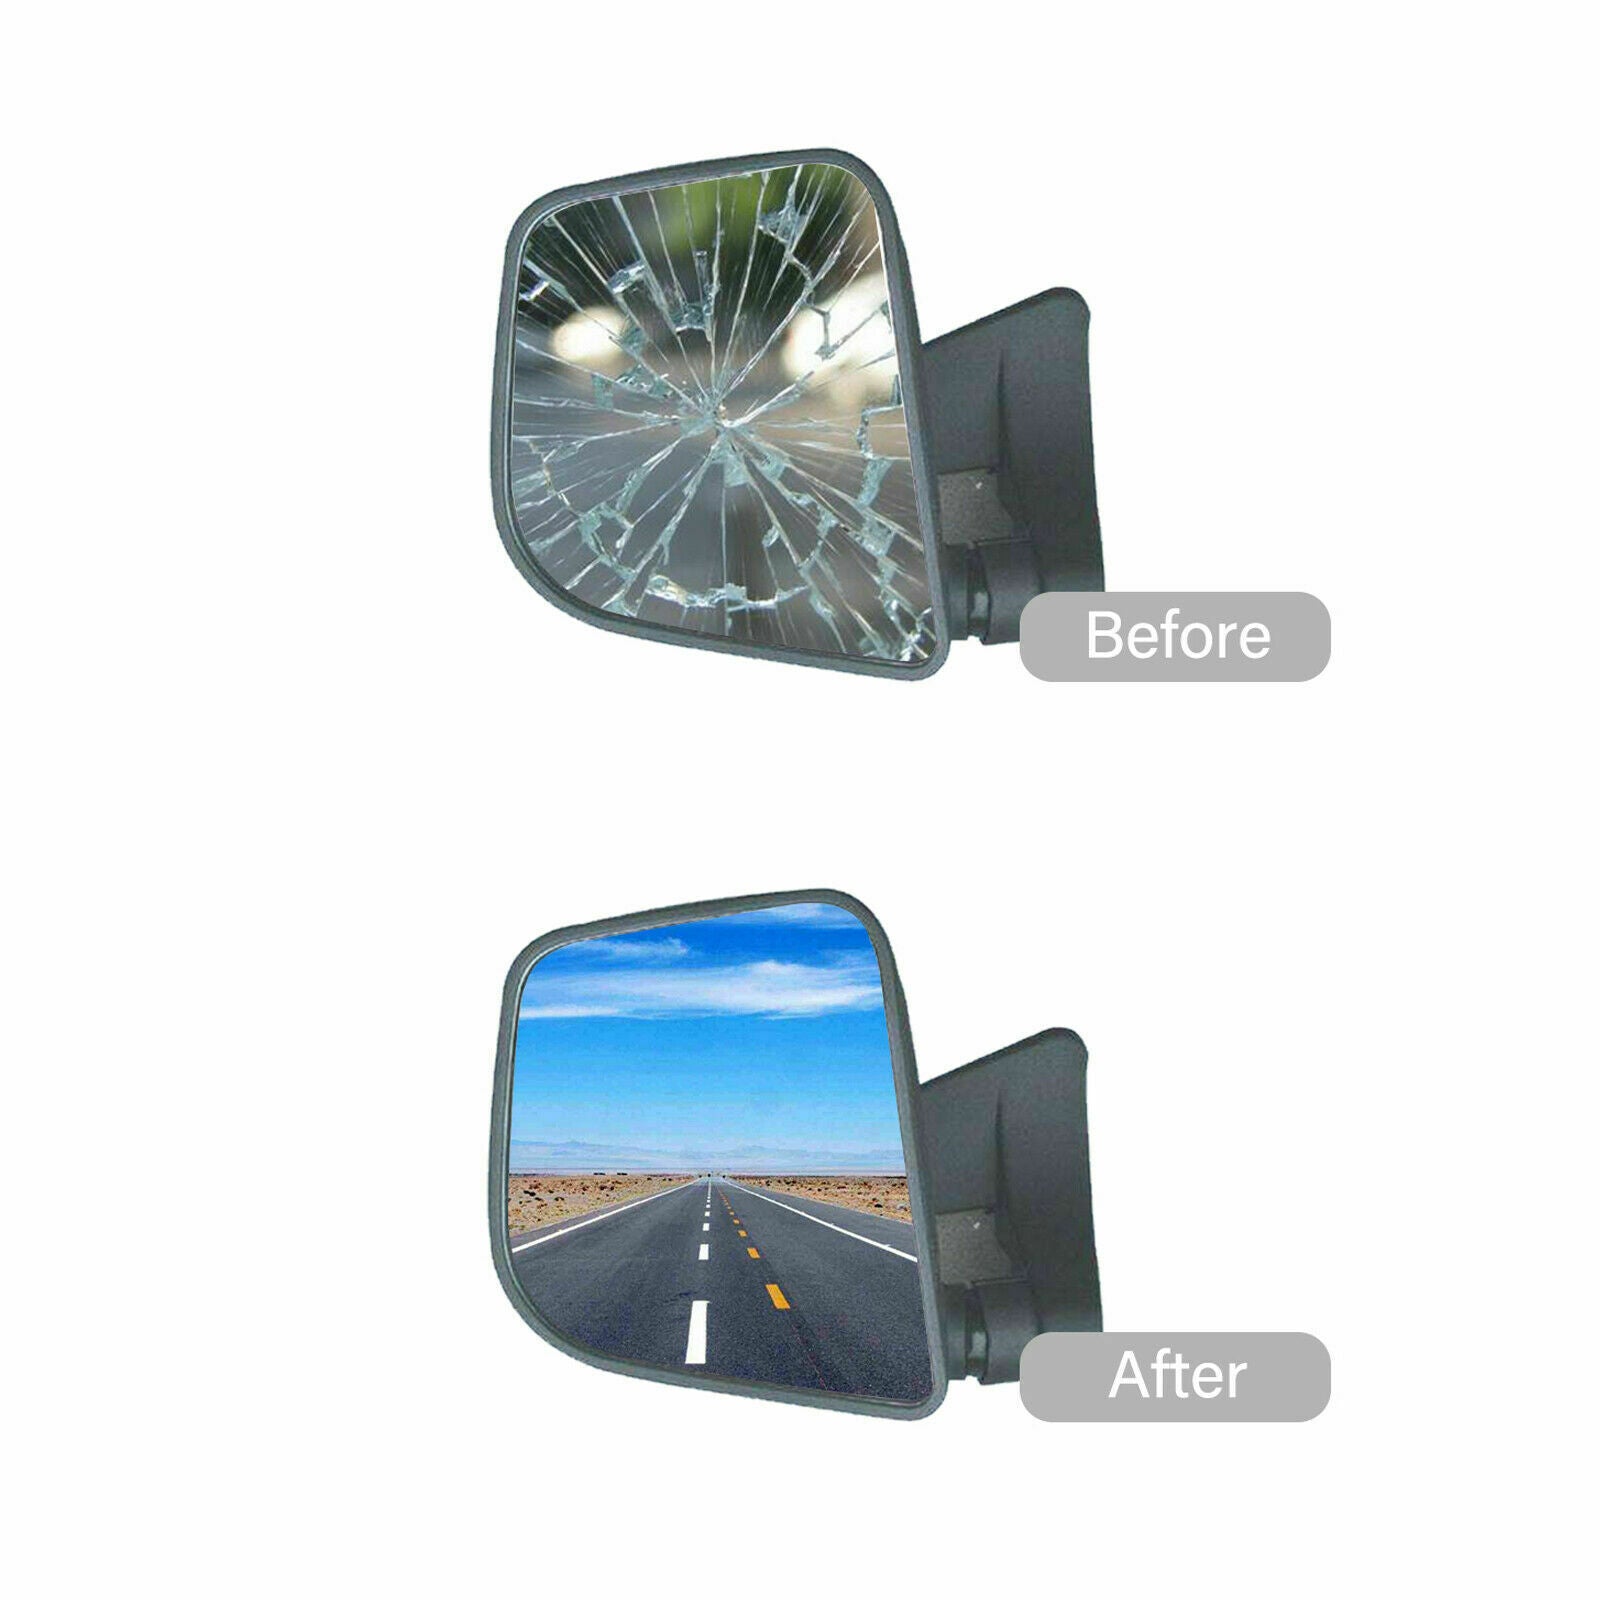 WLLW Replacement Mirror Glass for 2013-2018 TOYOTA AVALON/2012-2017 TOYOTA CAMRY, Driver Left Side LH/Passenger Right Side RH/The Both Sides Flat Convex M-0067